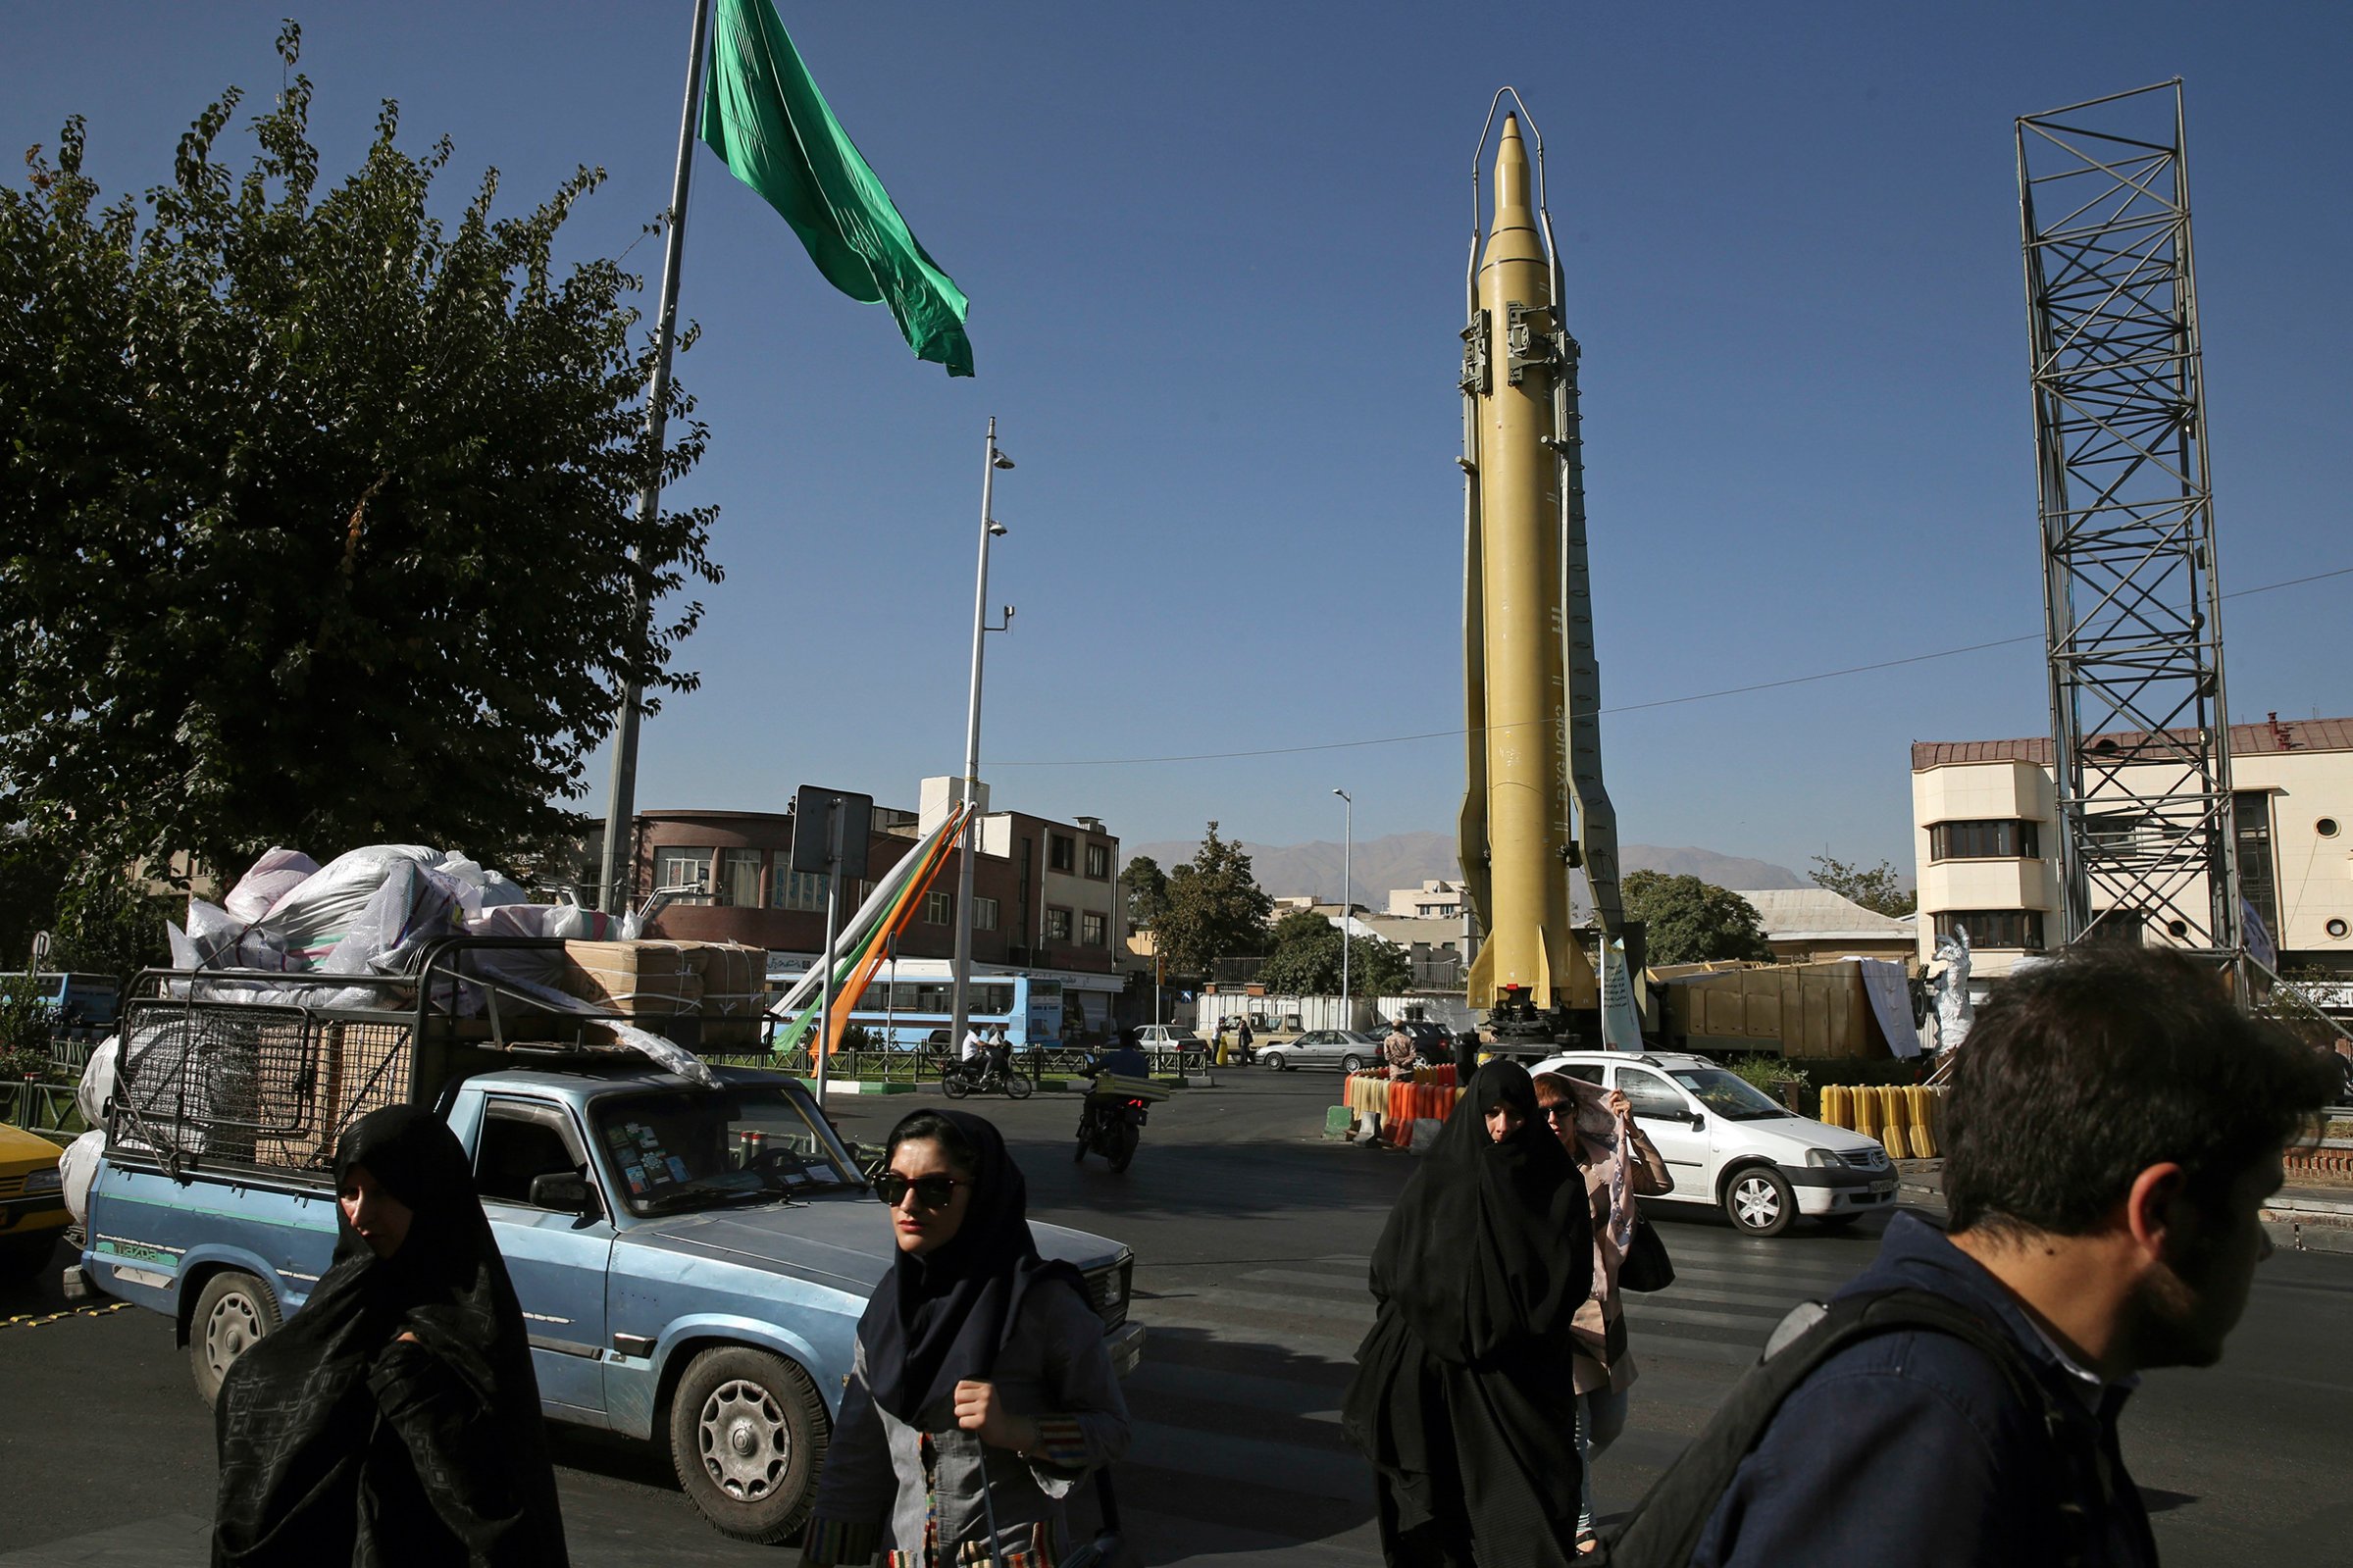 Iranians walk past a Ghadr-F missile displayed at a Revolutionary Guard hardware exhibition, marking 36th anniversary of the outset of Iran-Iraq war, in downtown Tehran on Sept. 25, 2016.